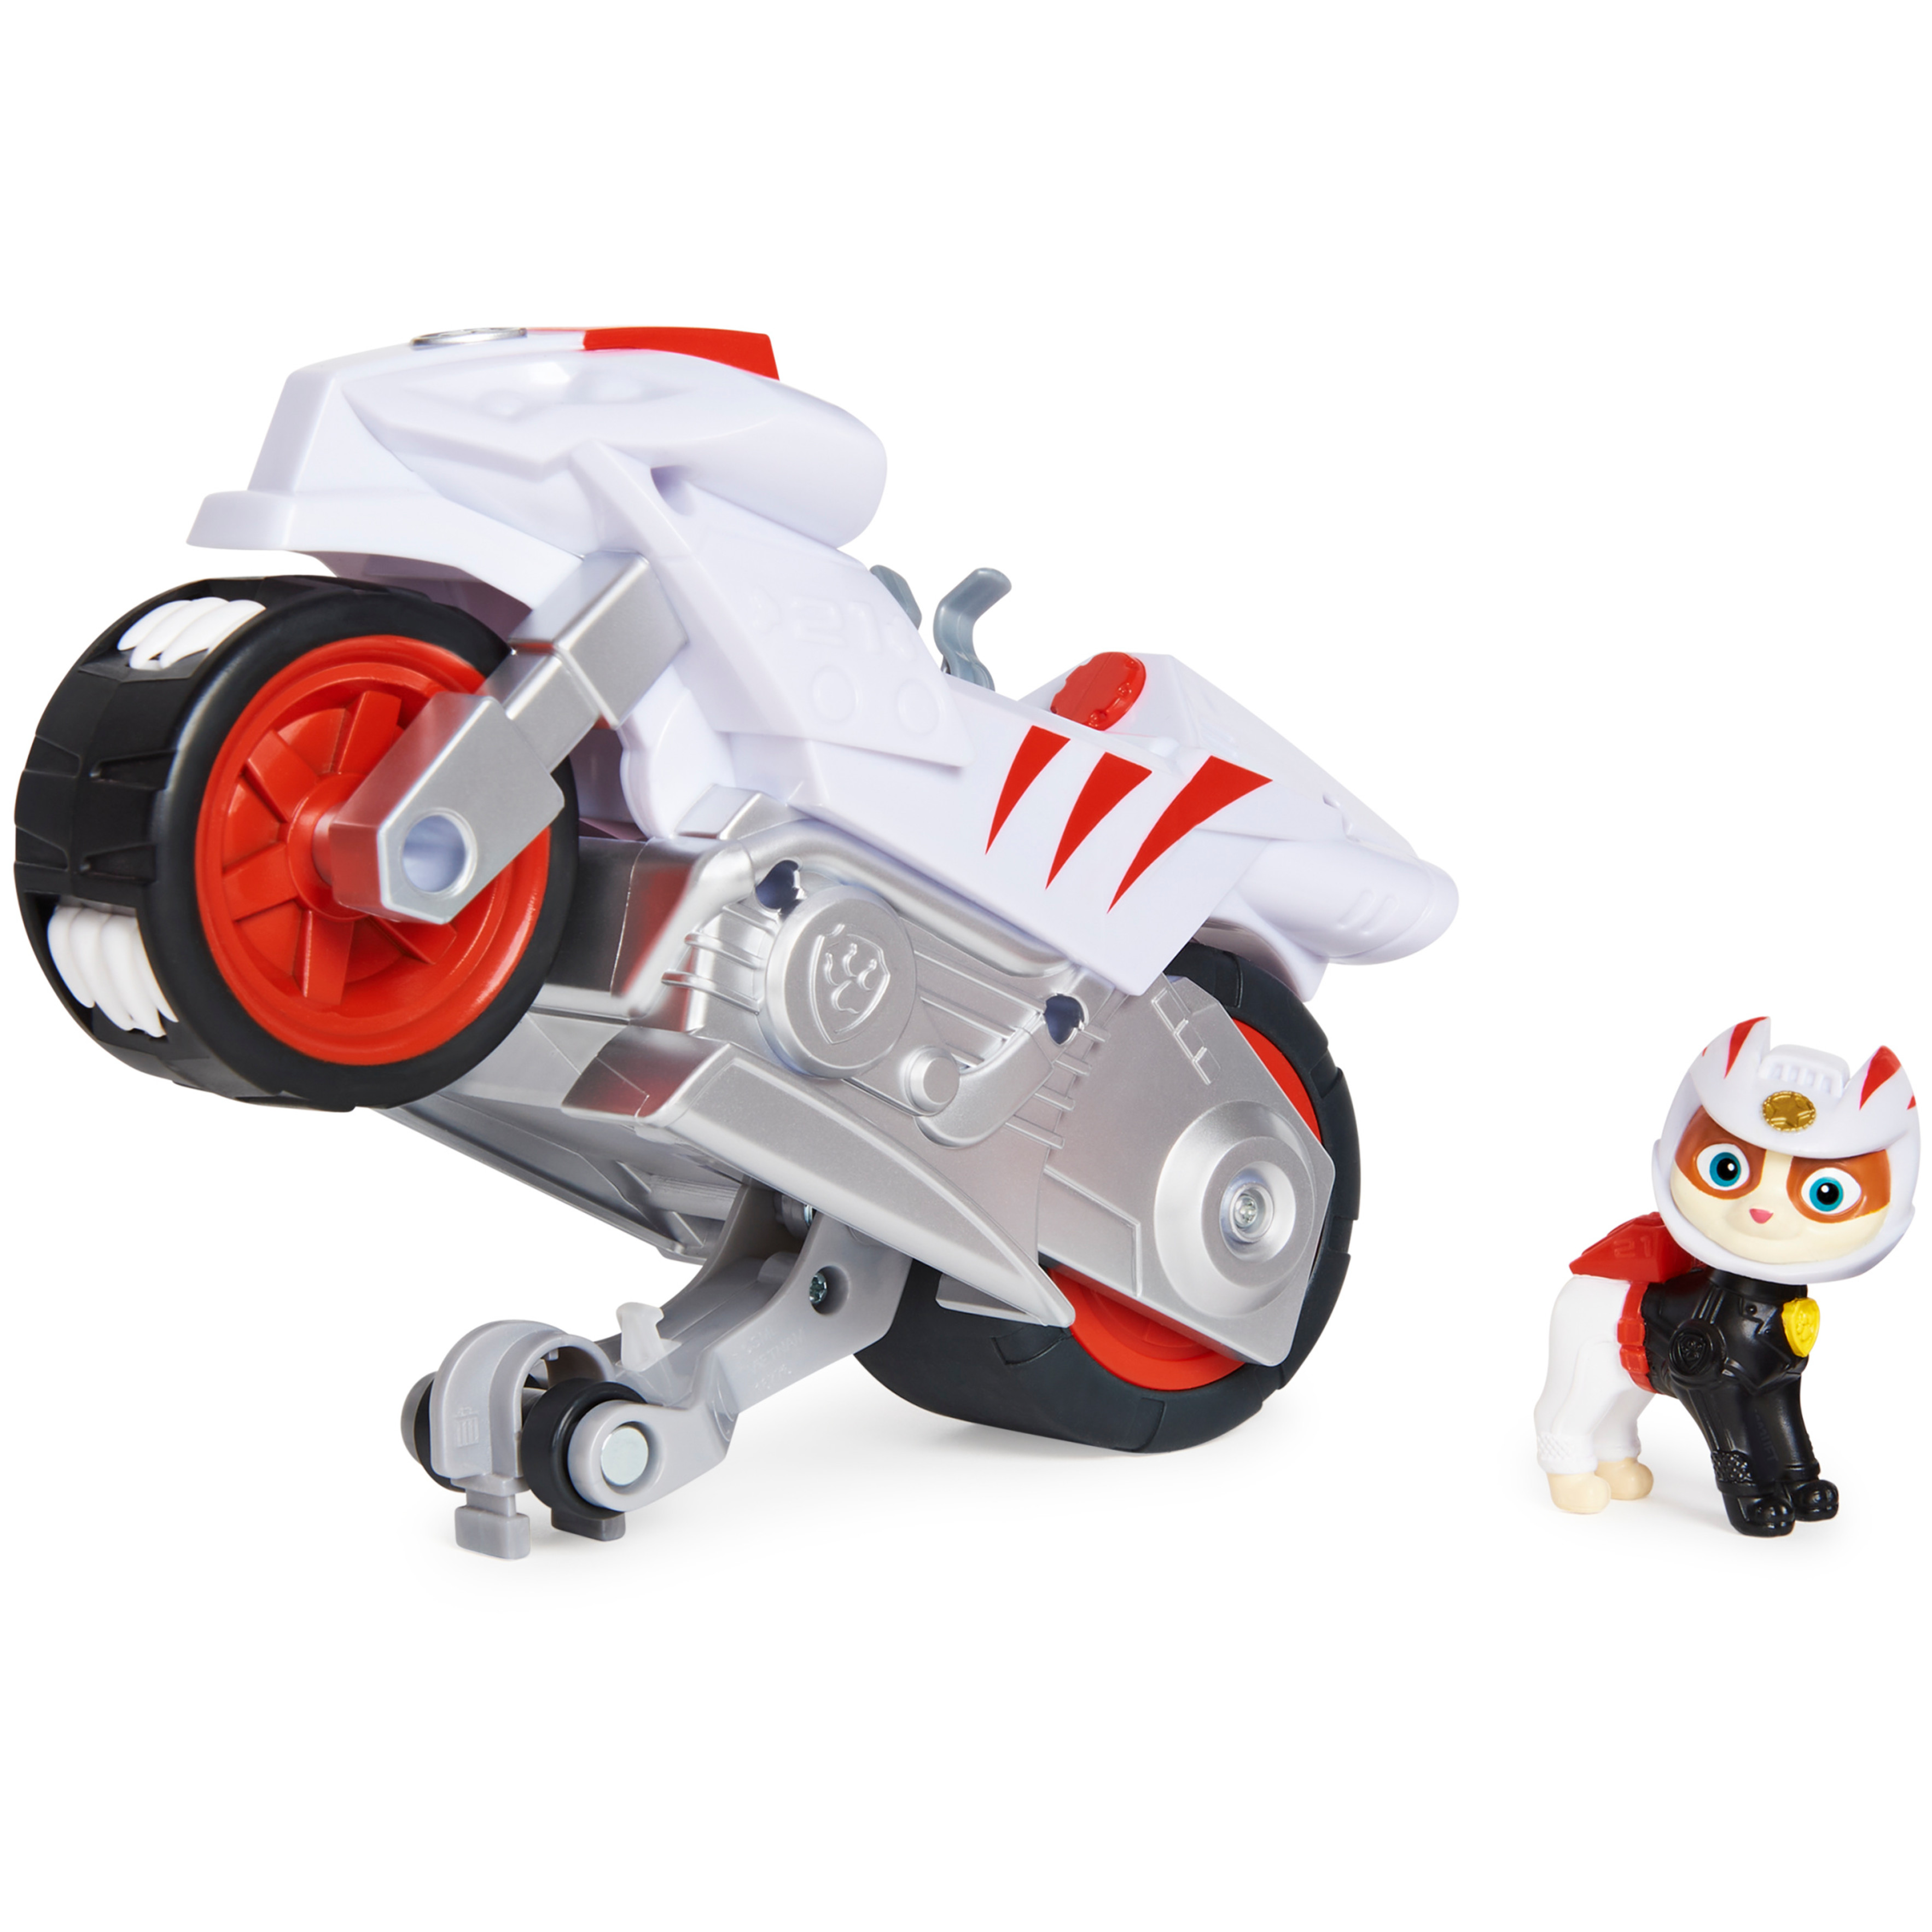 PAW Patrol, Moto Pups Wildcat’s Deluxe Pull Back Motorcycle Vehicle with Wheelie Feature and Toy Figure - image 1 of 8